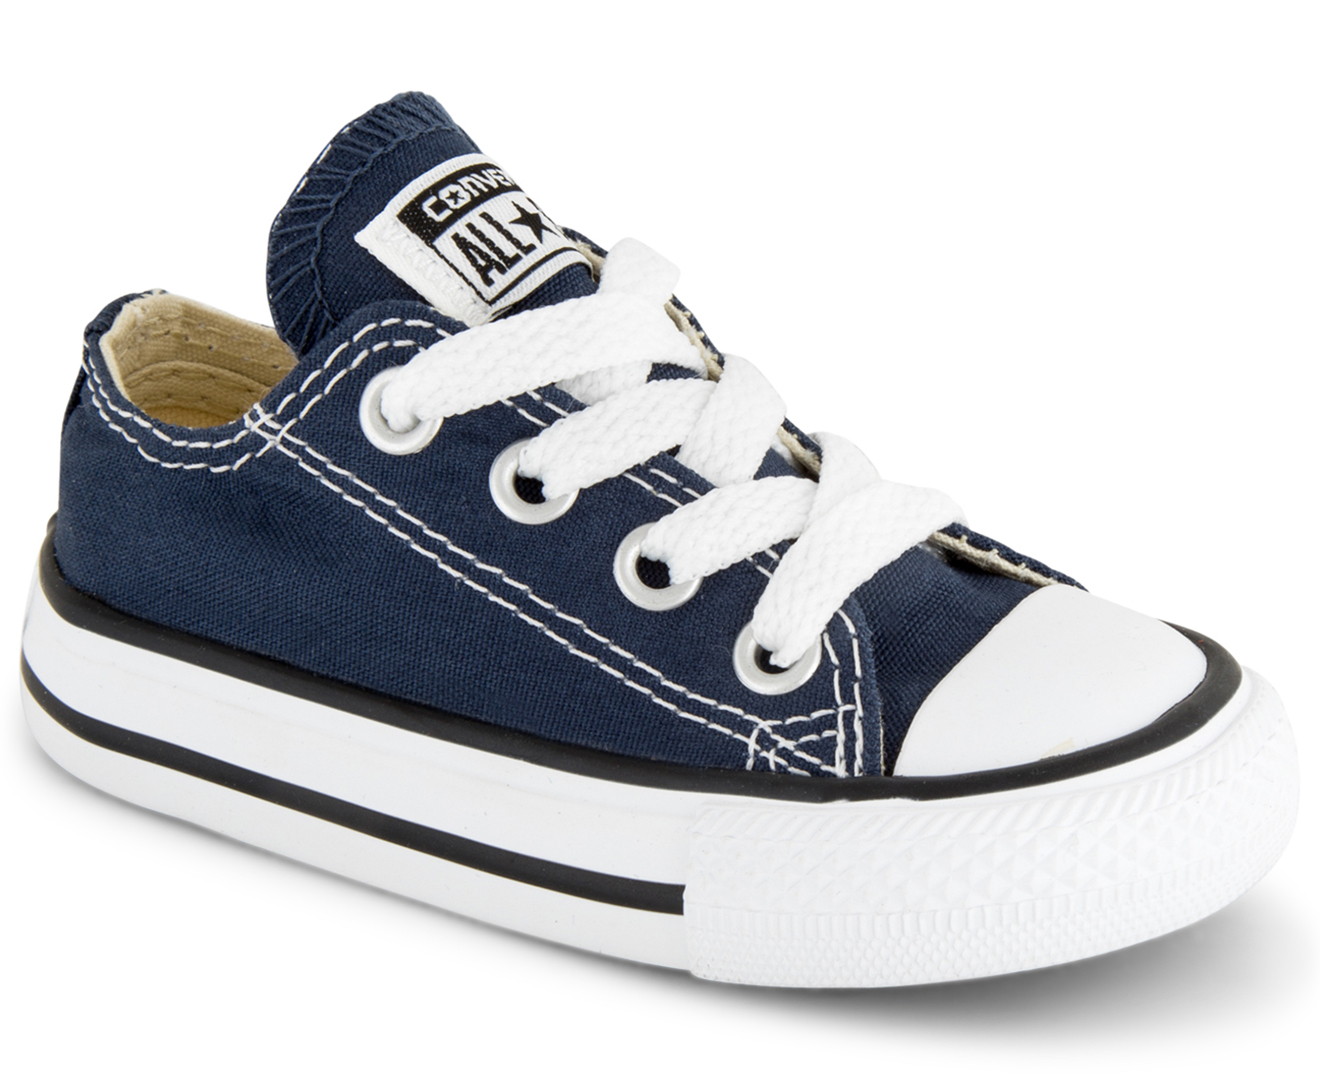 Converse Toddler Chuck Taylor All Star Ox Low Top Sneakers - Navy ...